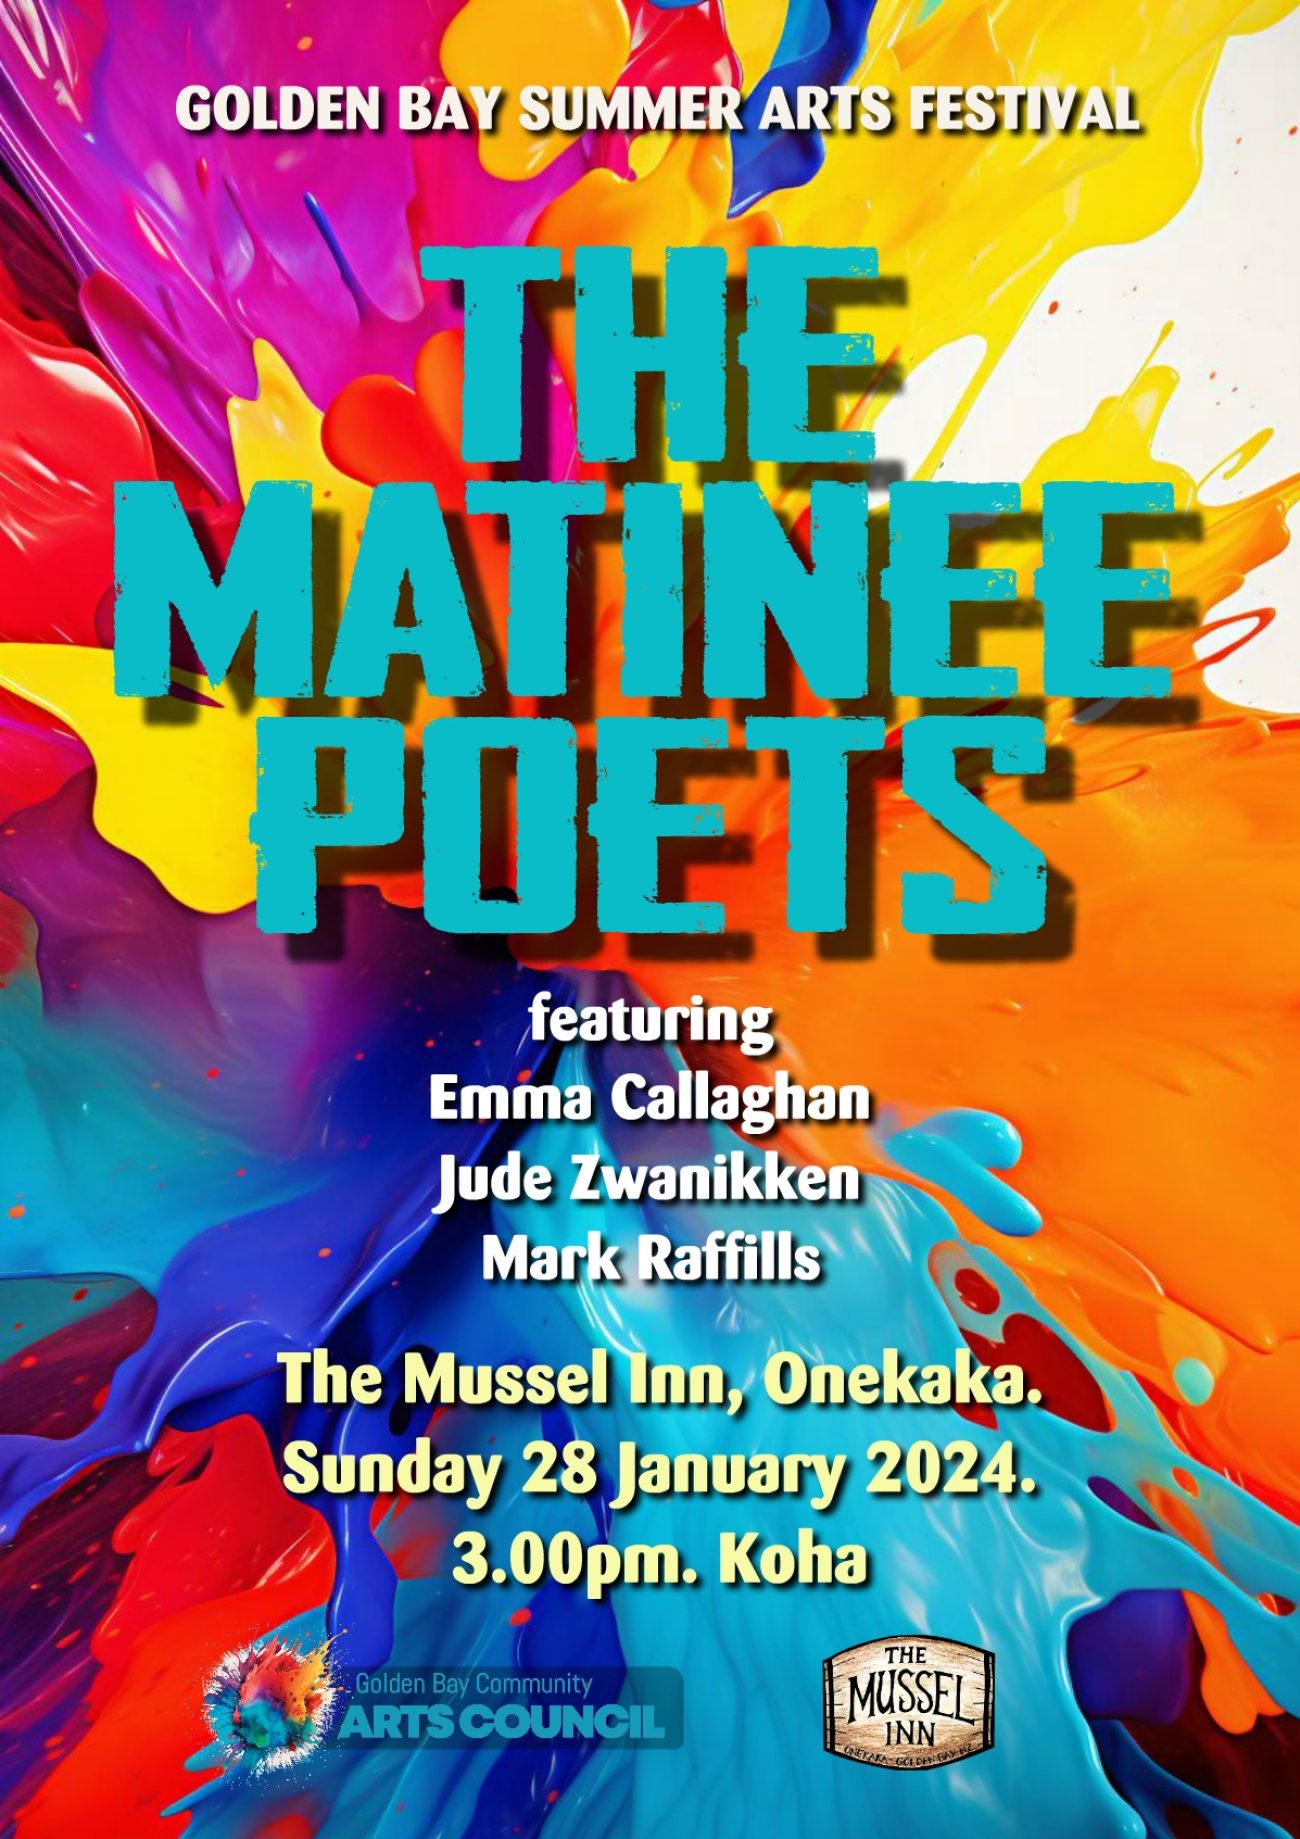 THE MATINEE POETS